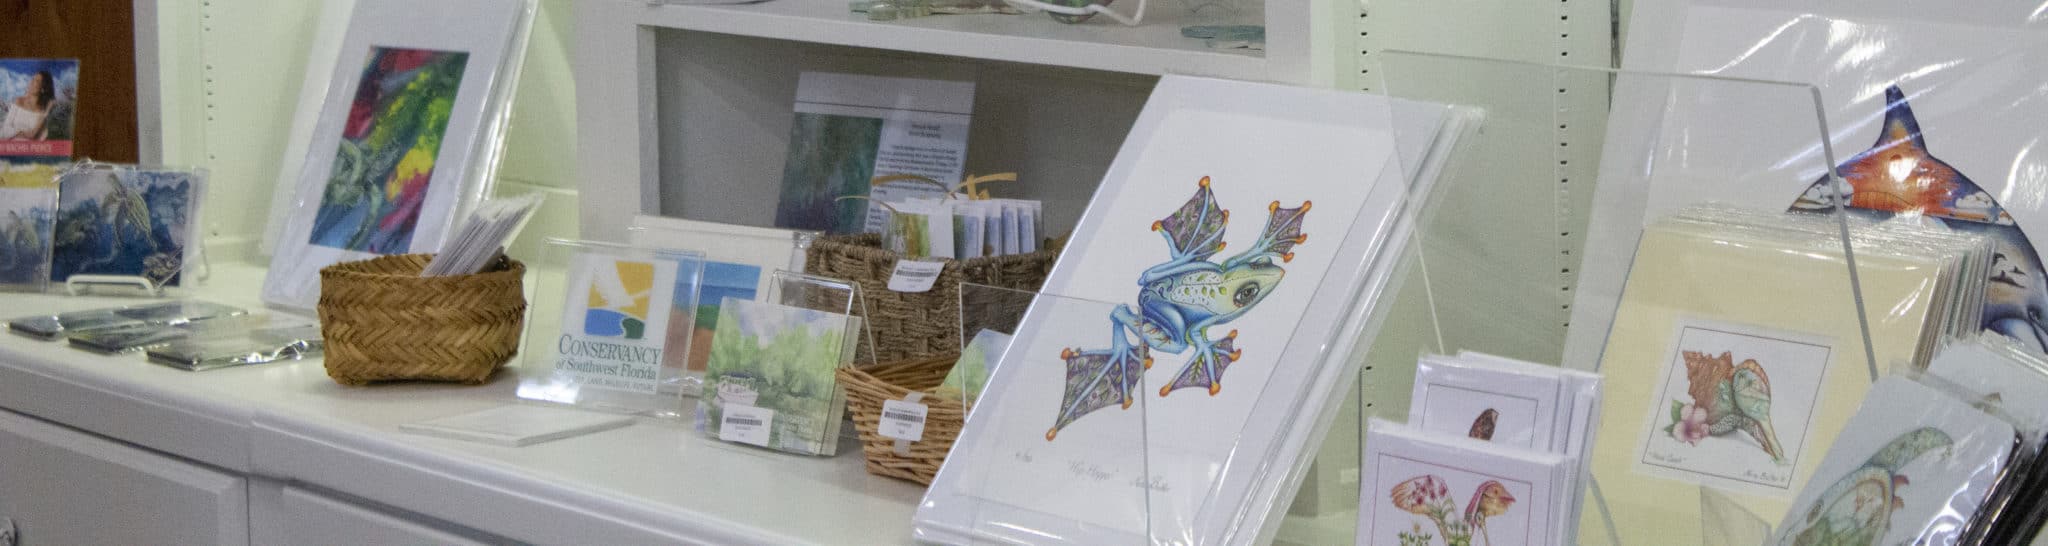 gift shop featured local artists